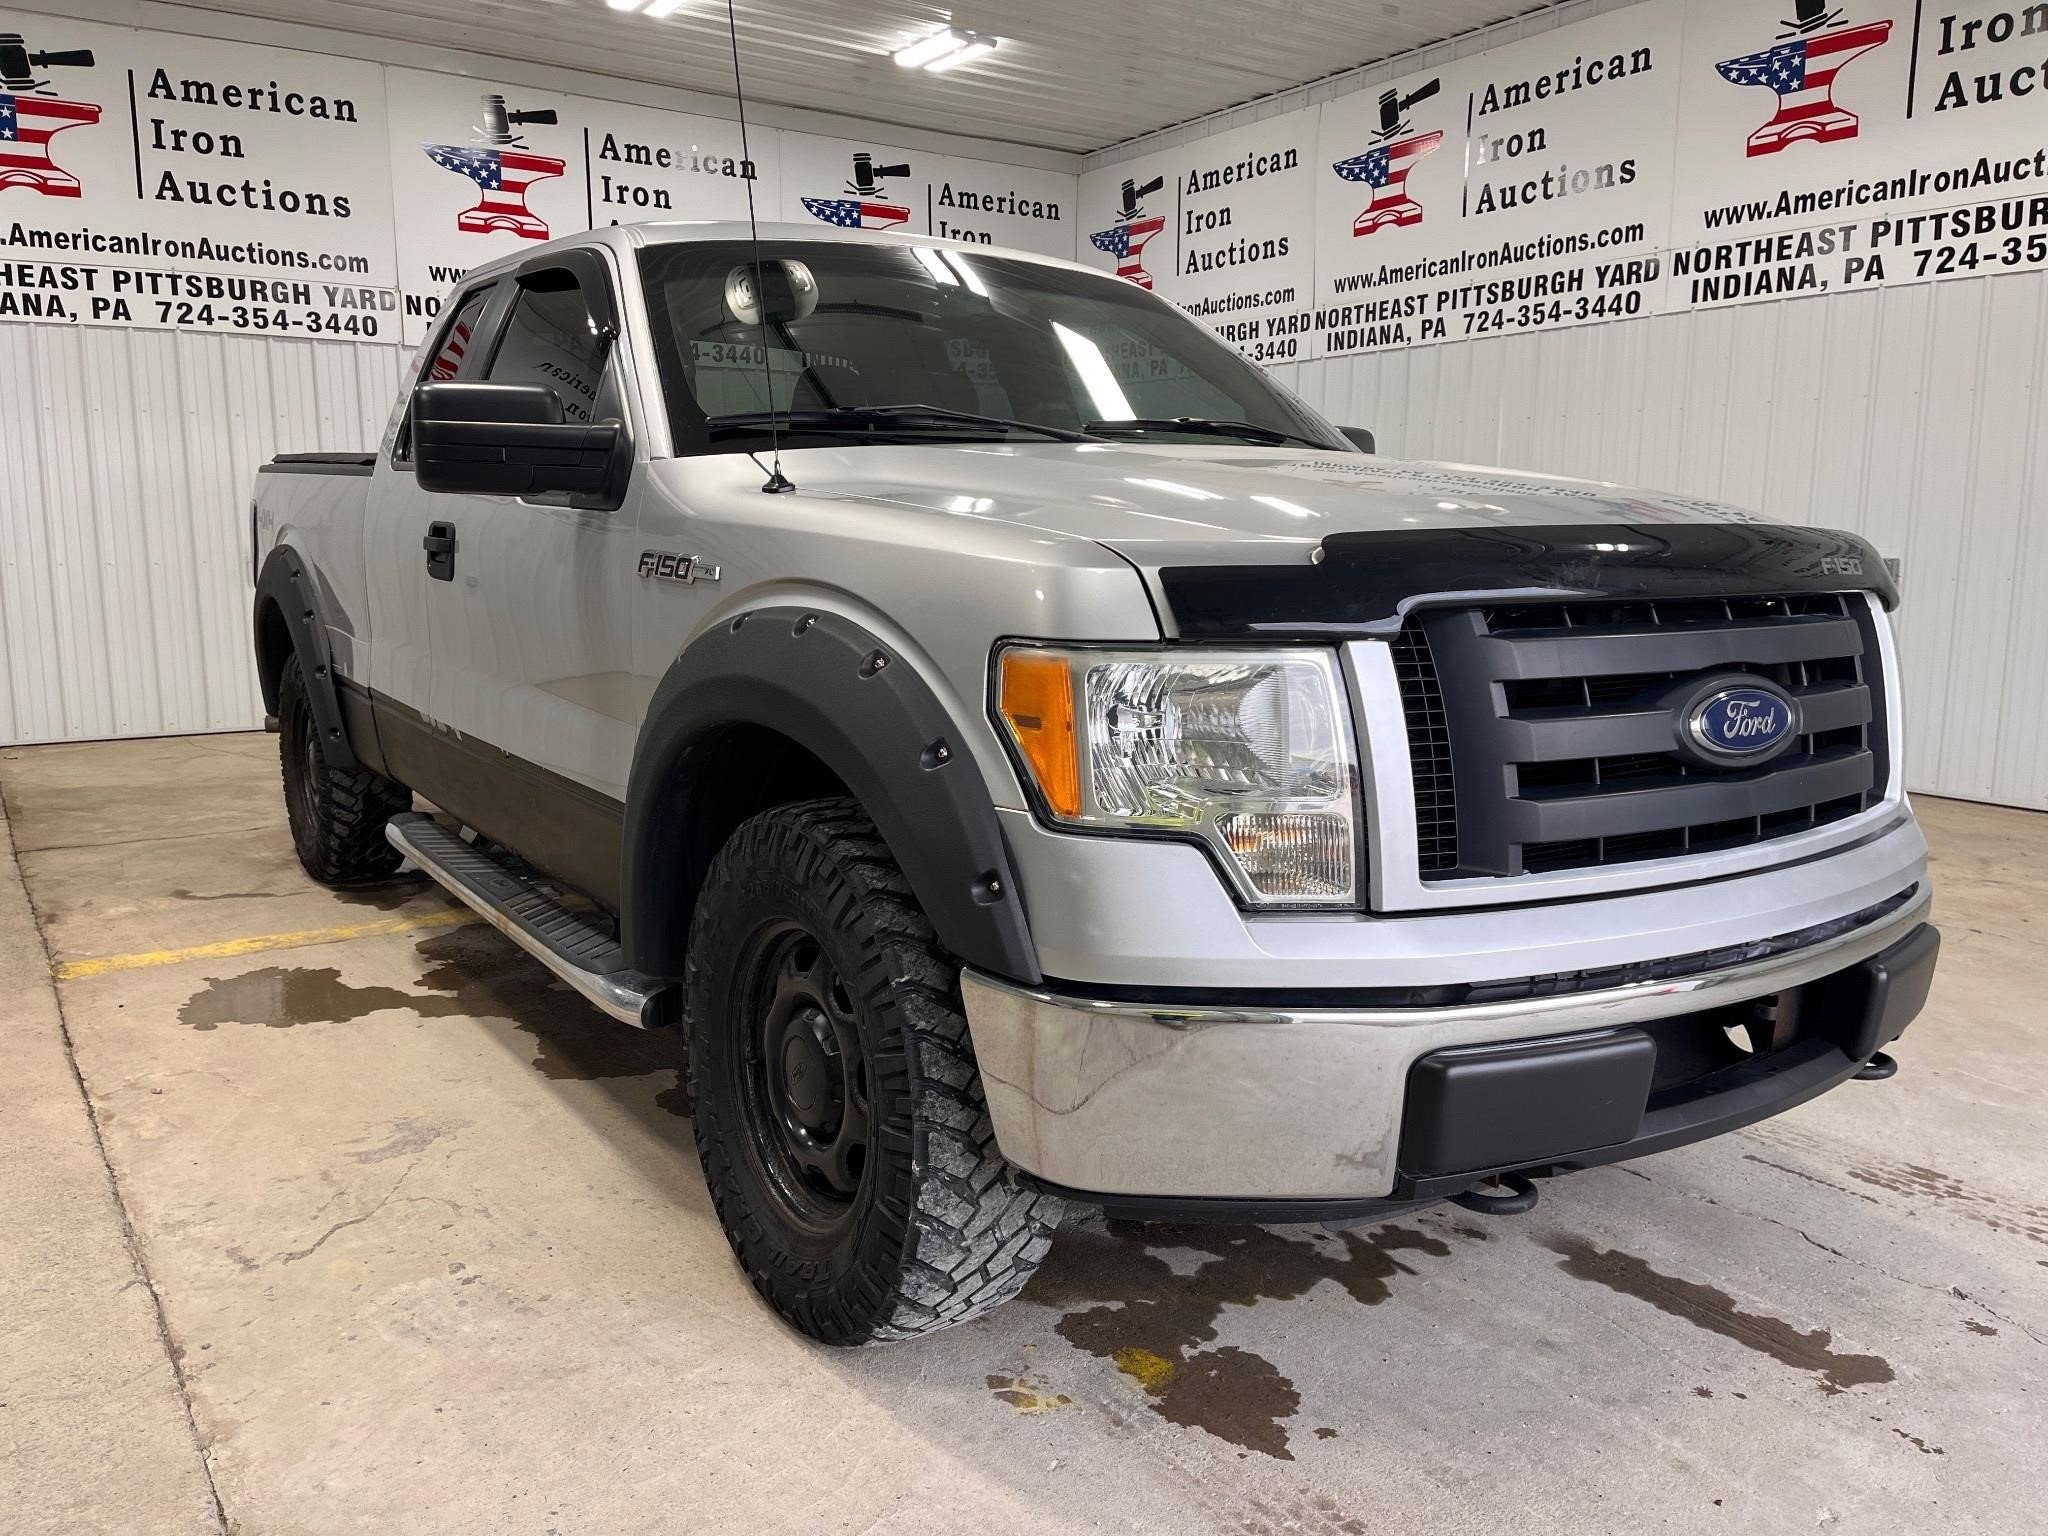 2010 Ford F150 Truck - Titled